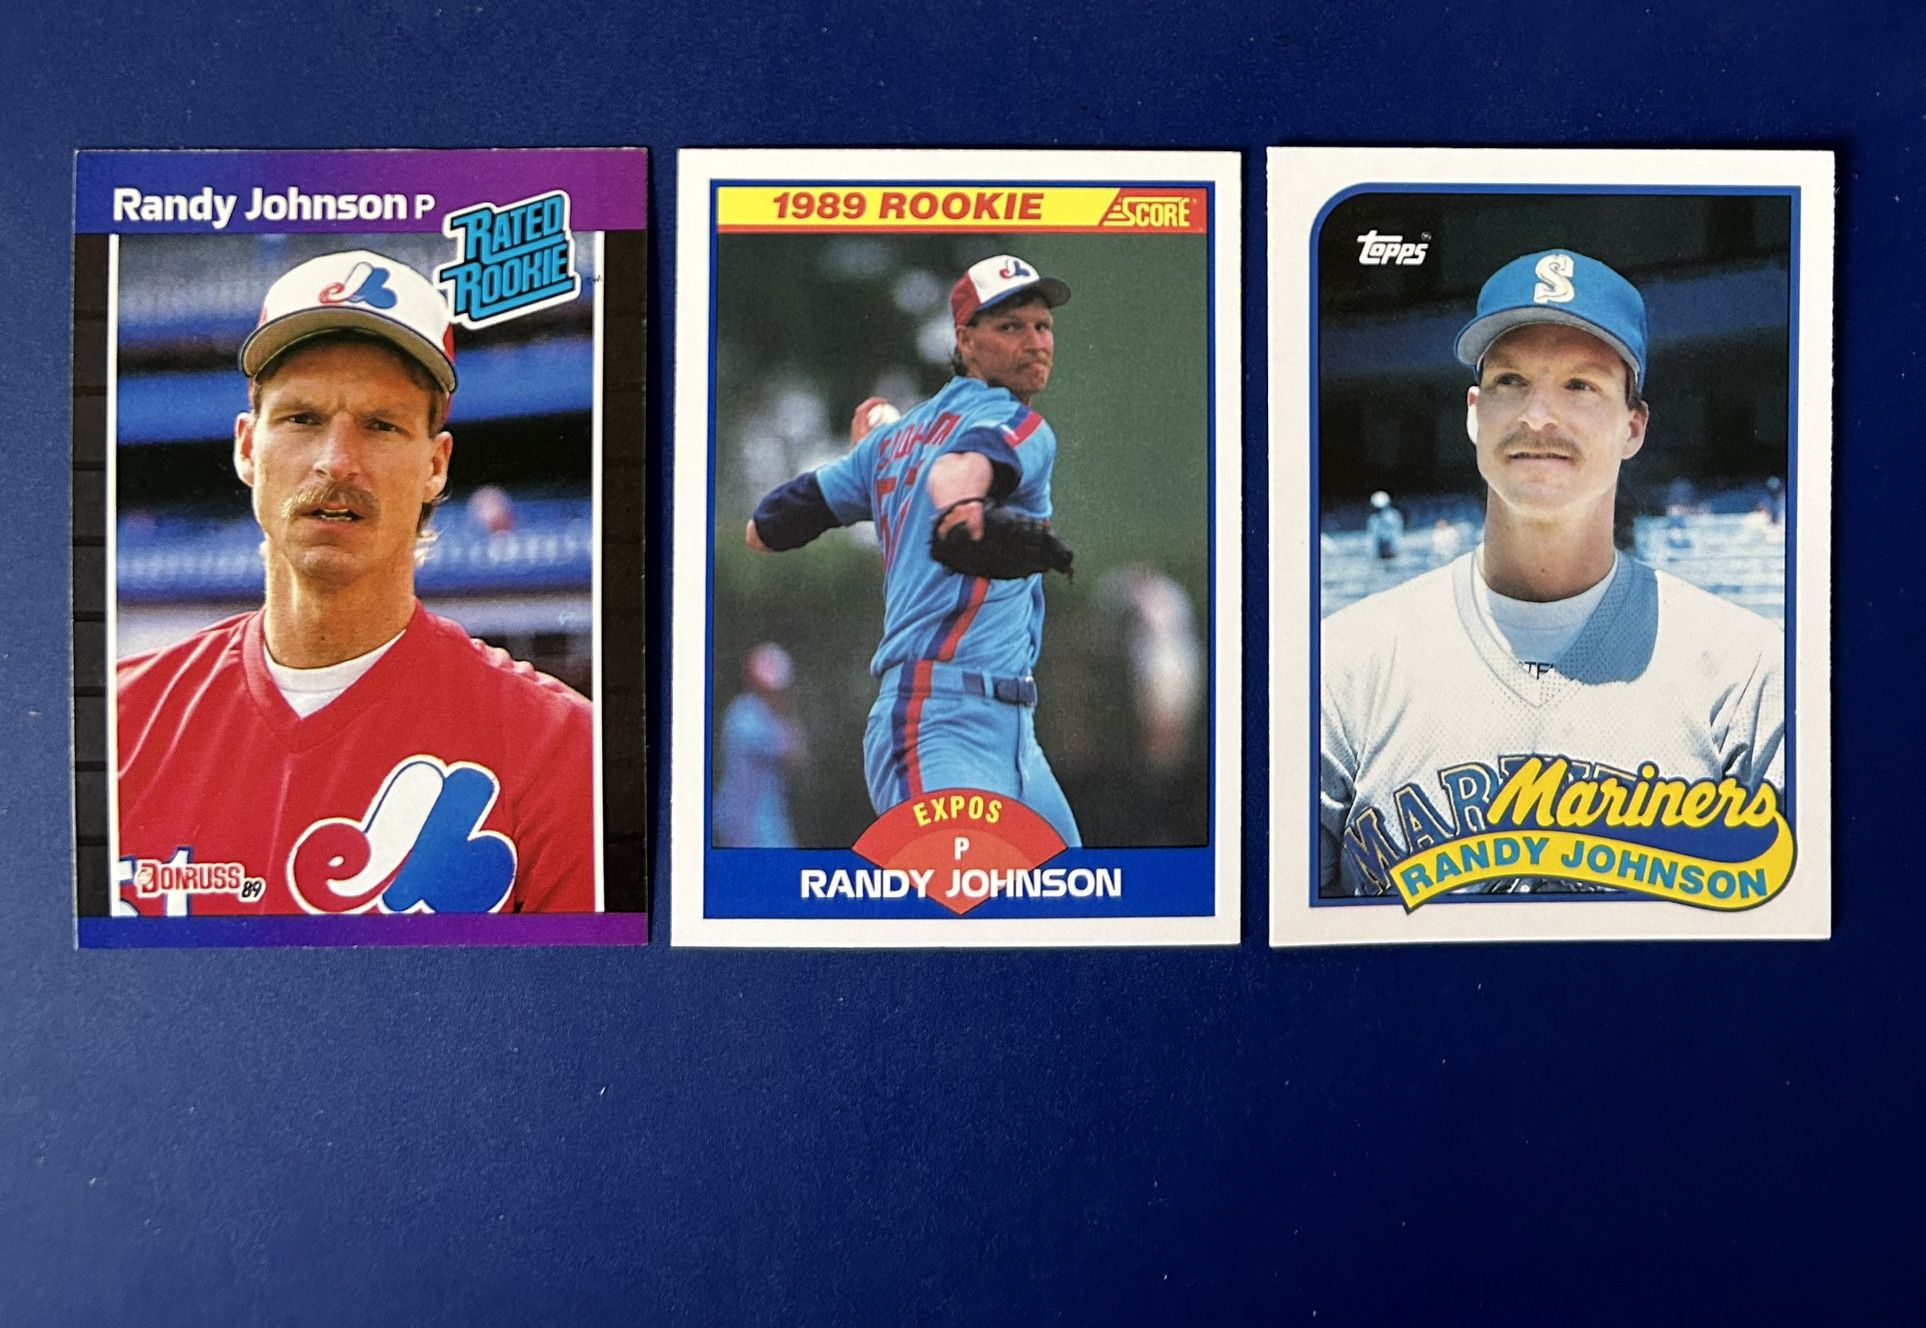 Randy Johnson Rookie Baseball Card Lot for Sale in Columbia, MO